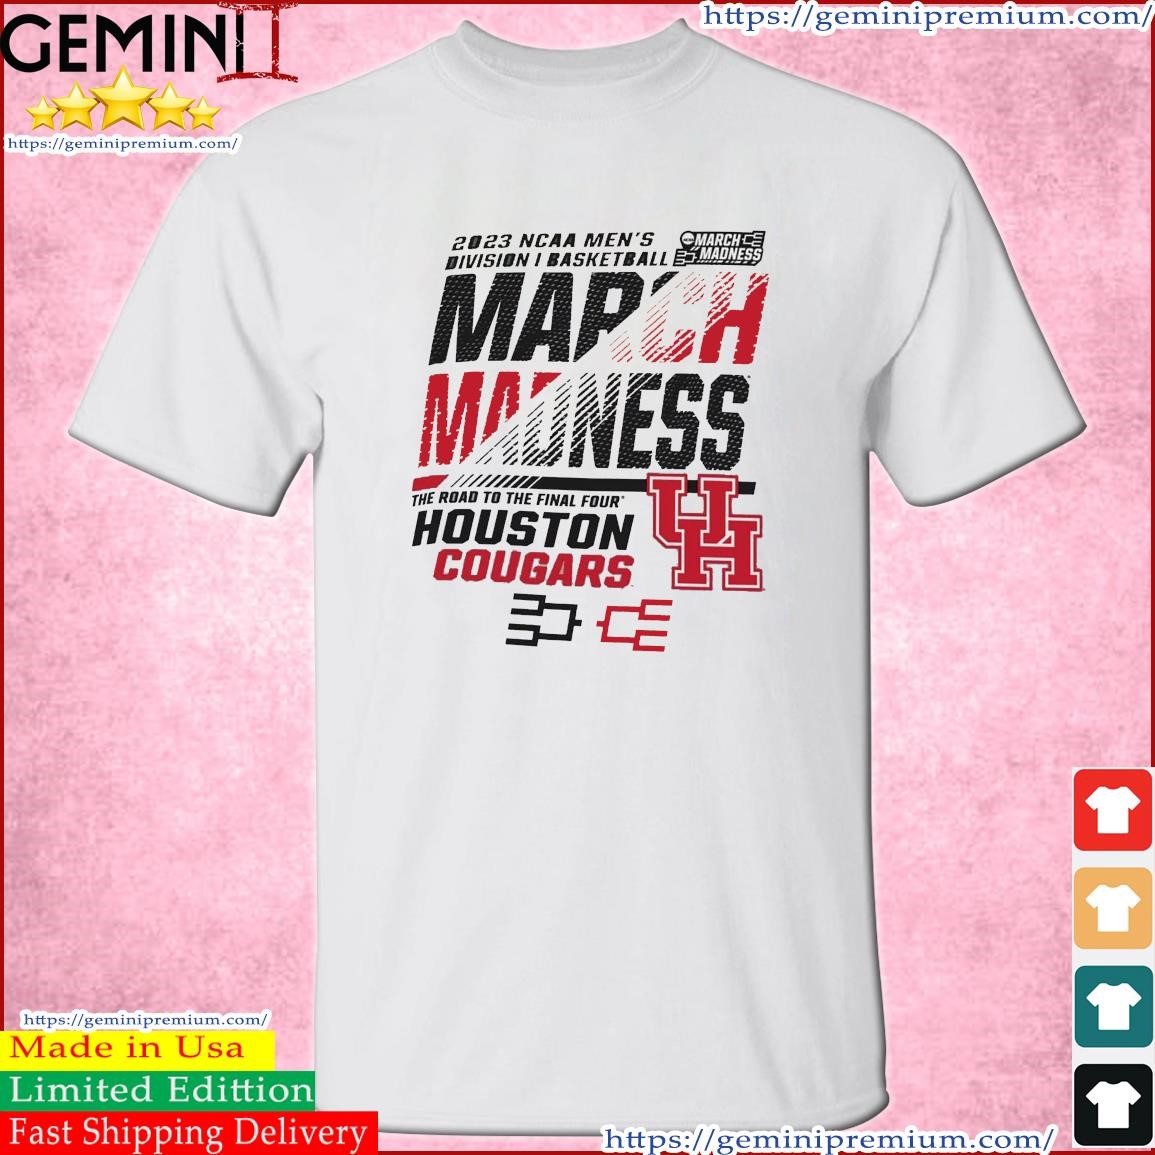 Houston Cougars Men's Basketball 2023 NCAA March Madness The Road To Final Four Shirt